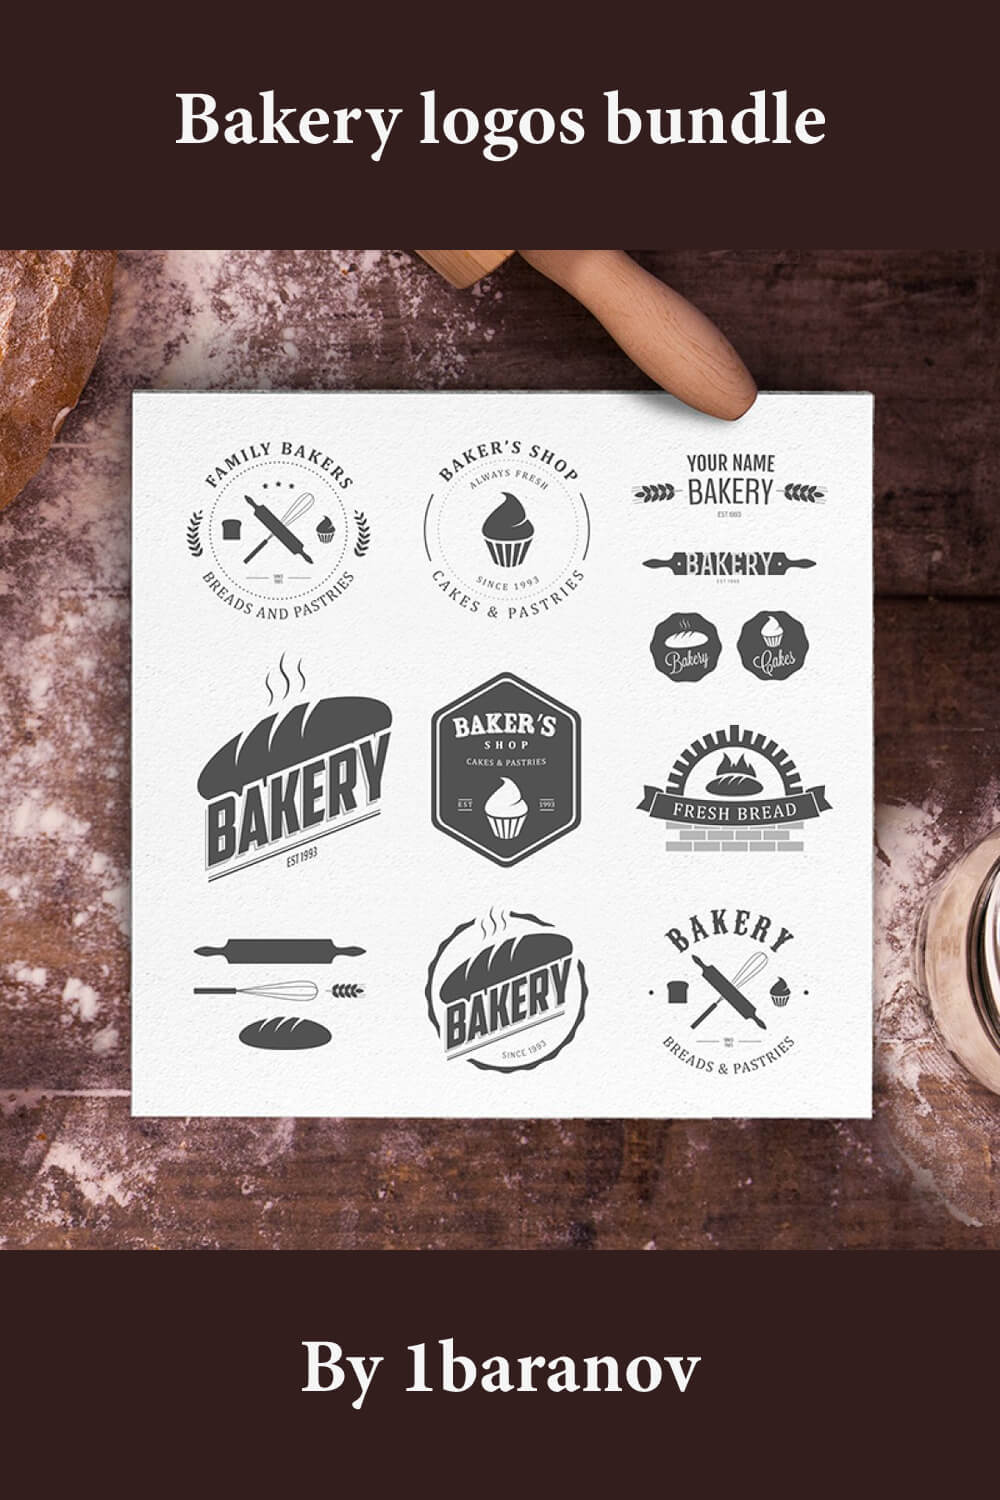 Logos of bakery and cakes.